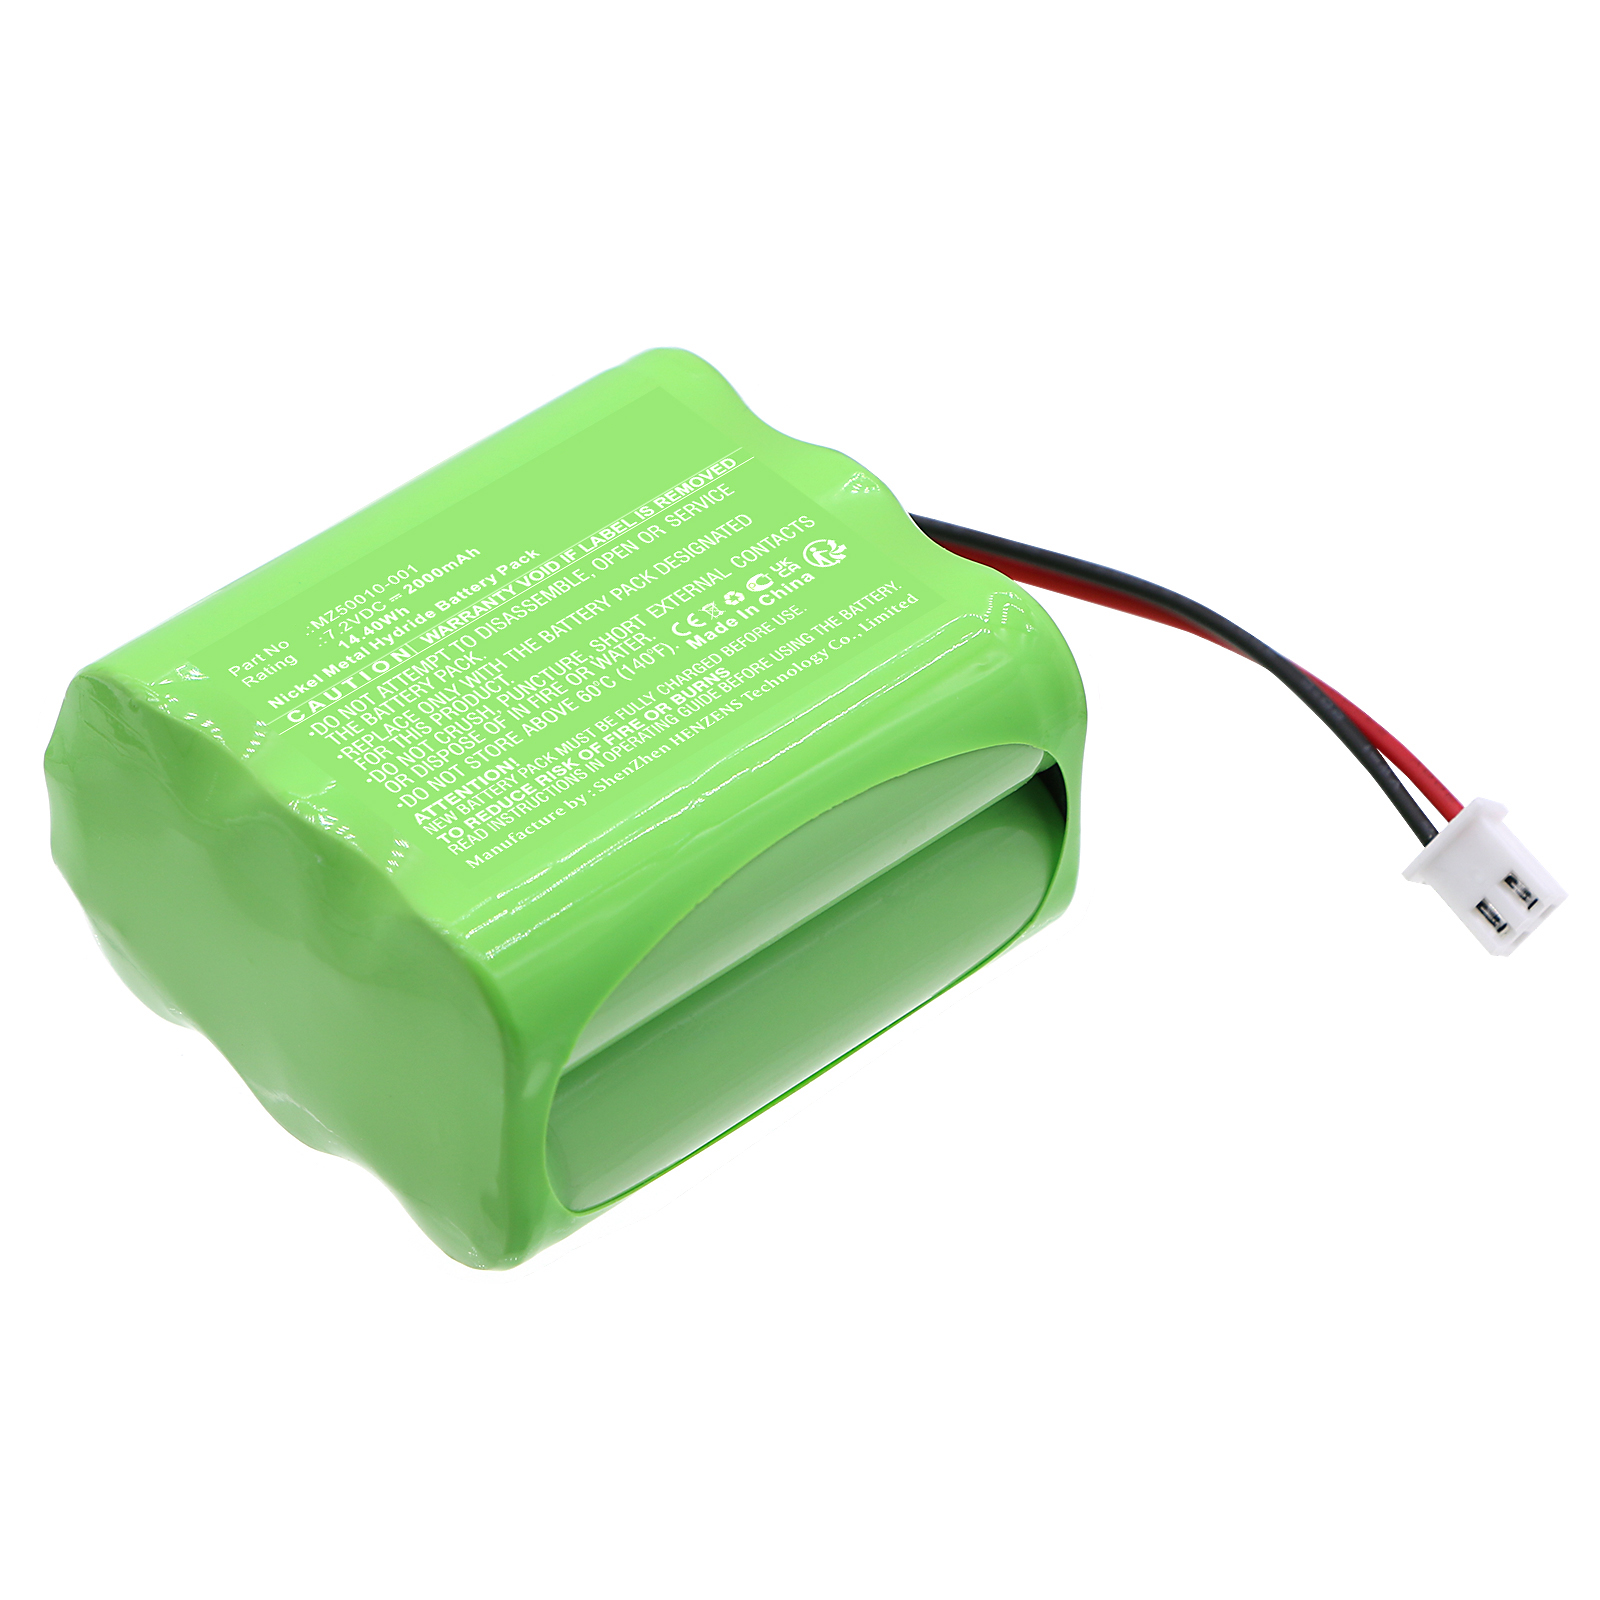 Synergy Digital Medical Battery, Compatible with ADE MZ50010-001 Medical Battery (Ni-MH, 7.2V, 2000mAh)